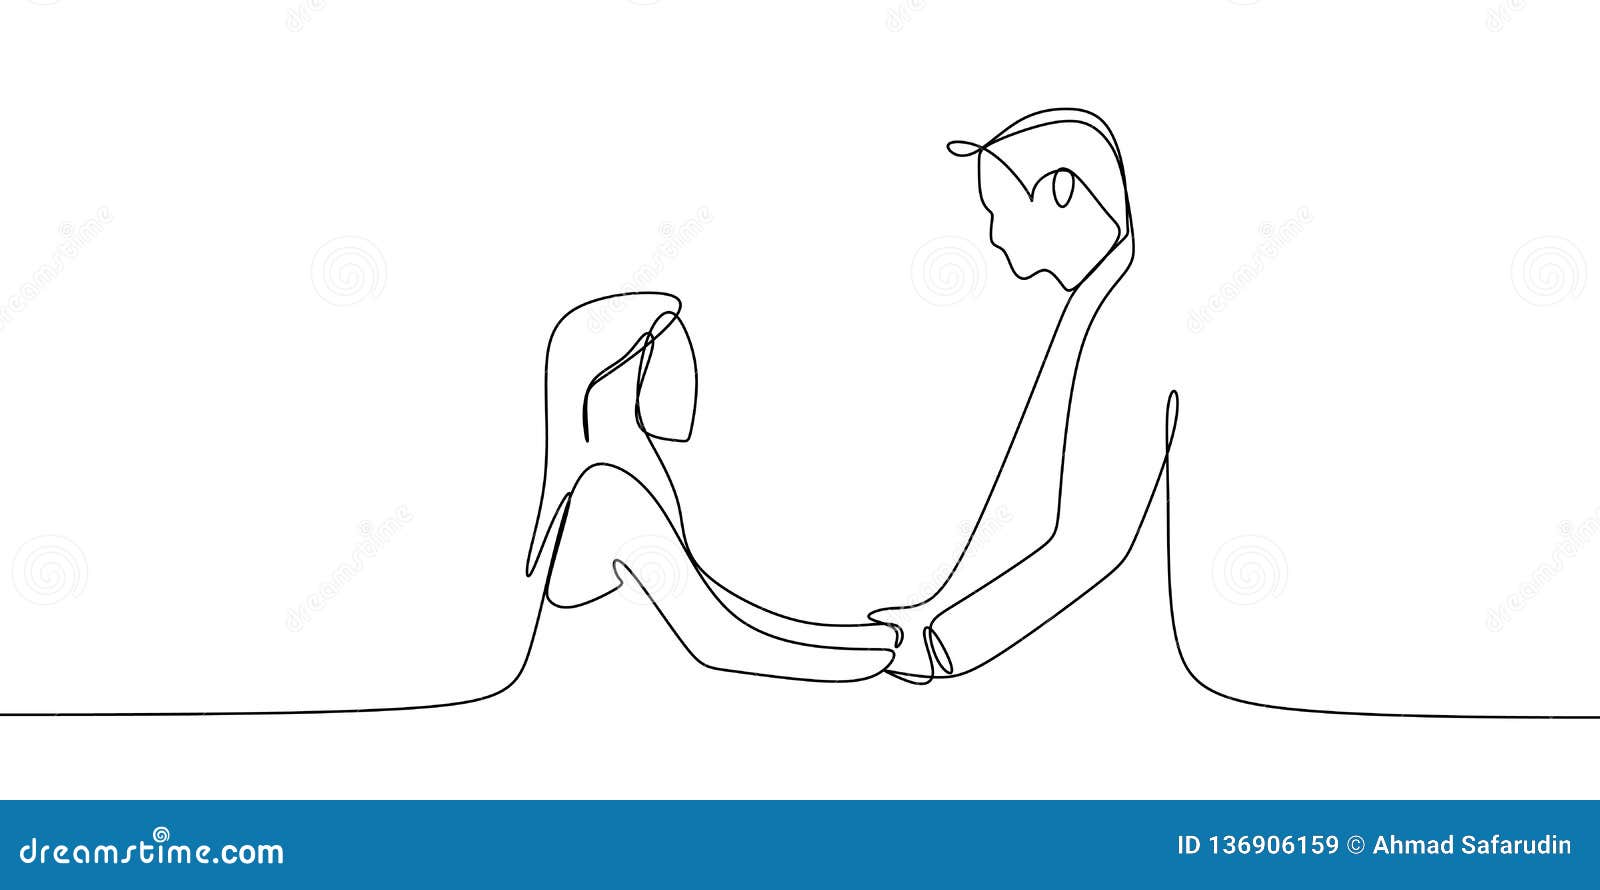 Couple In Love Together Valentine Sketch For Your Design Stock Illustration  - Download Image Now - iStock